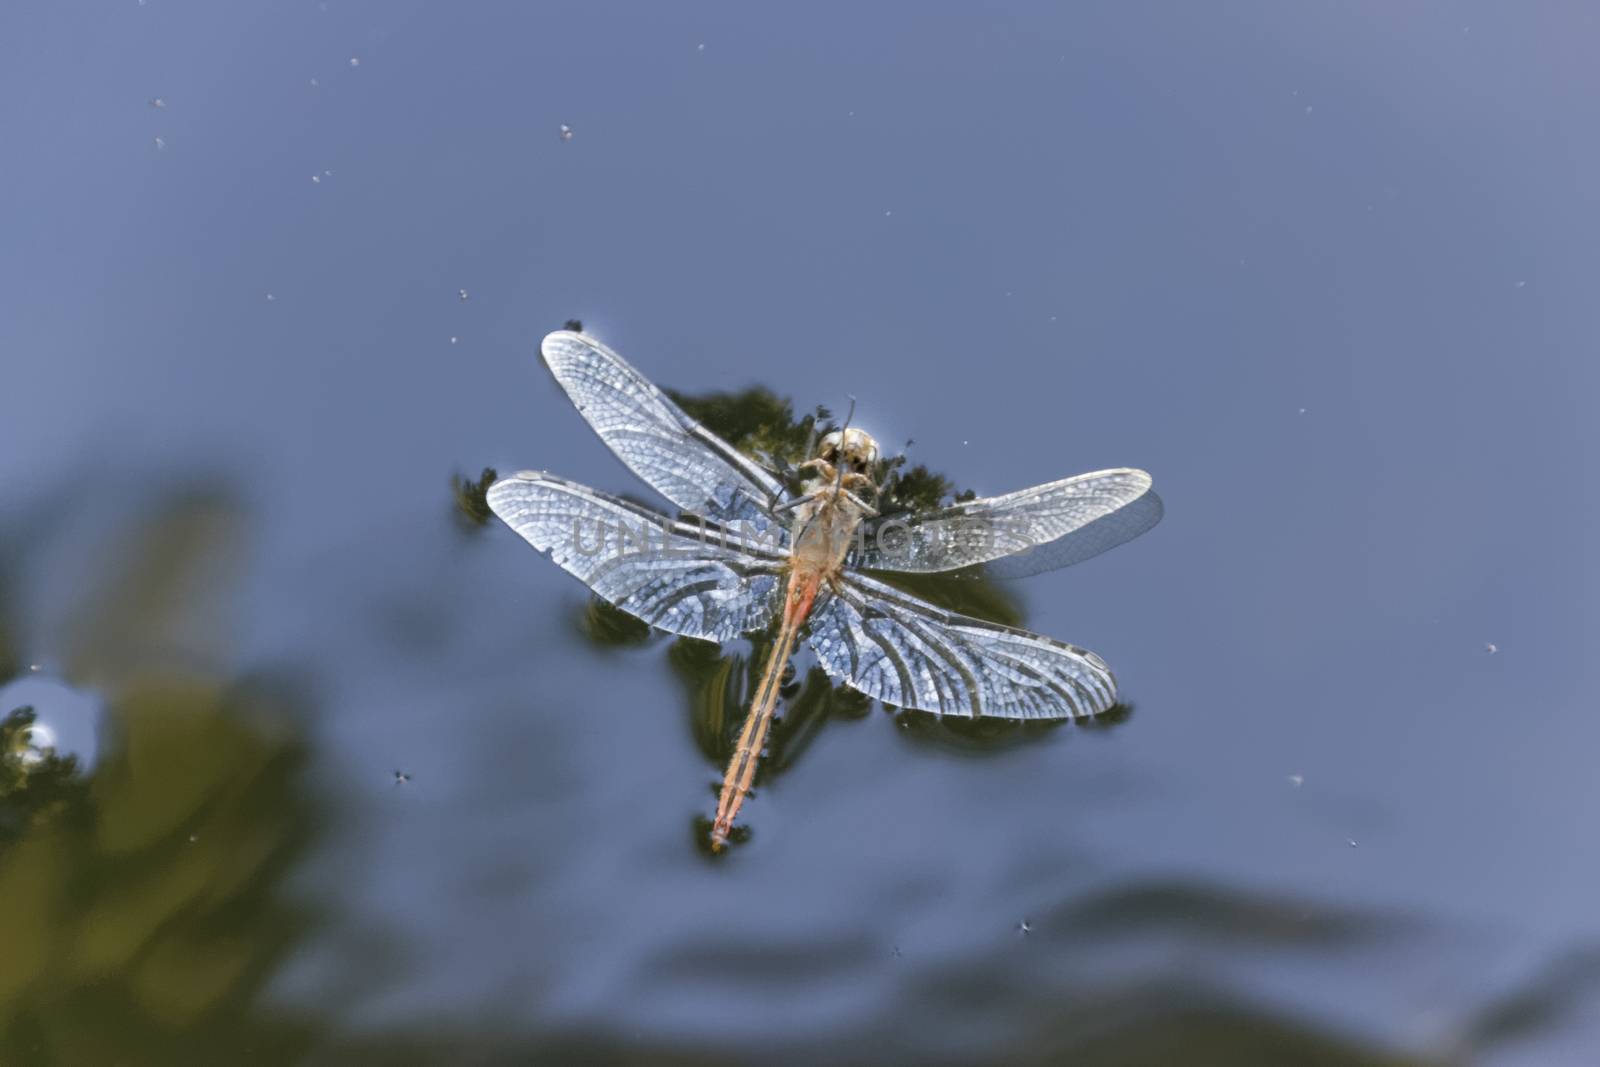 A dead dragonfly floating in a pool of water.